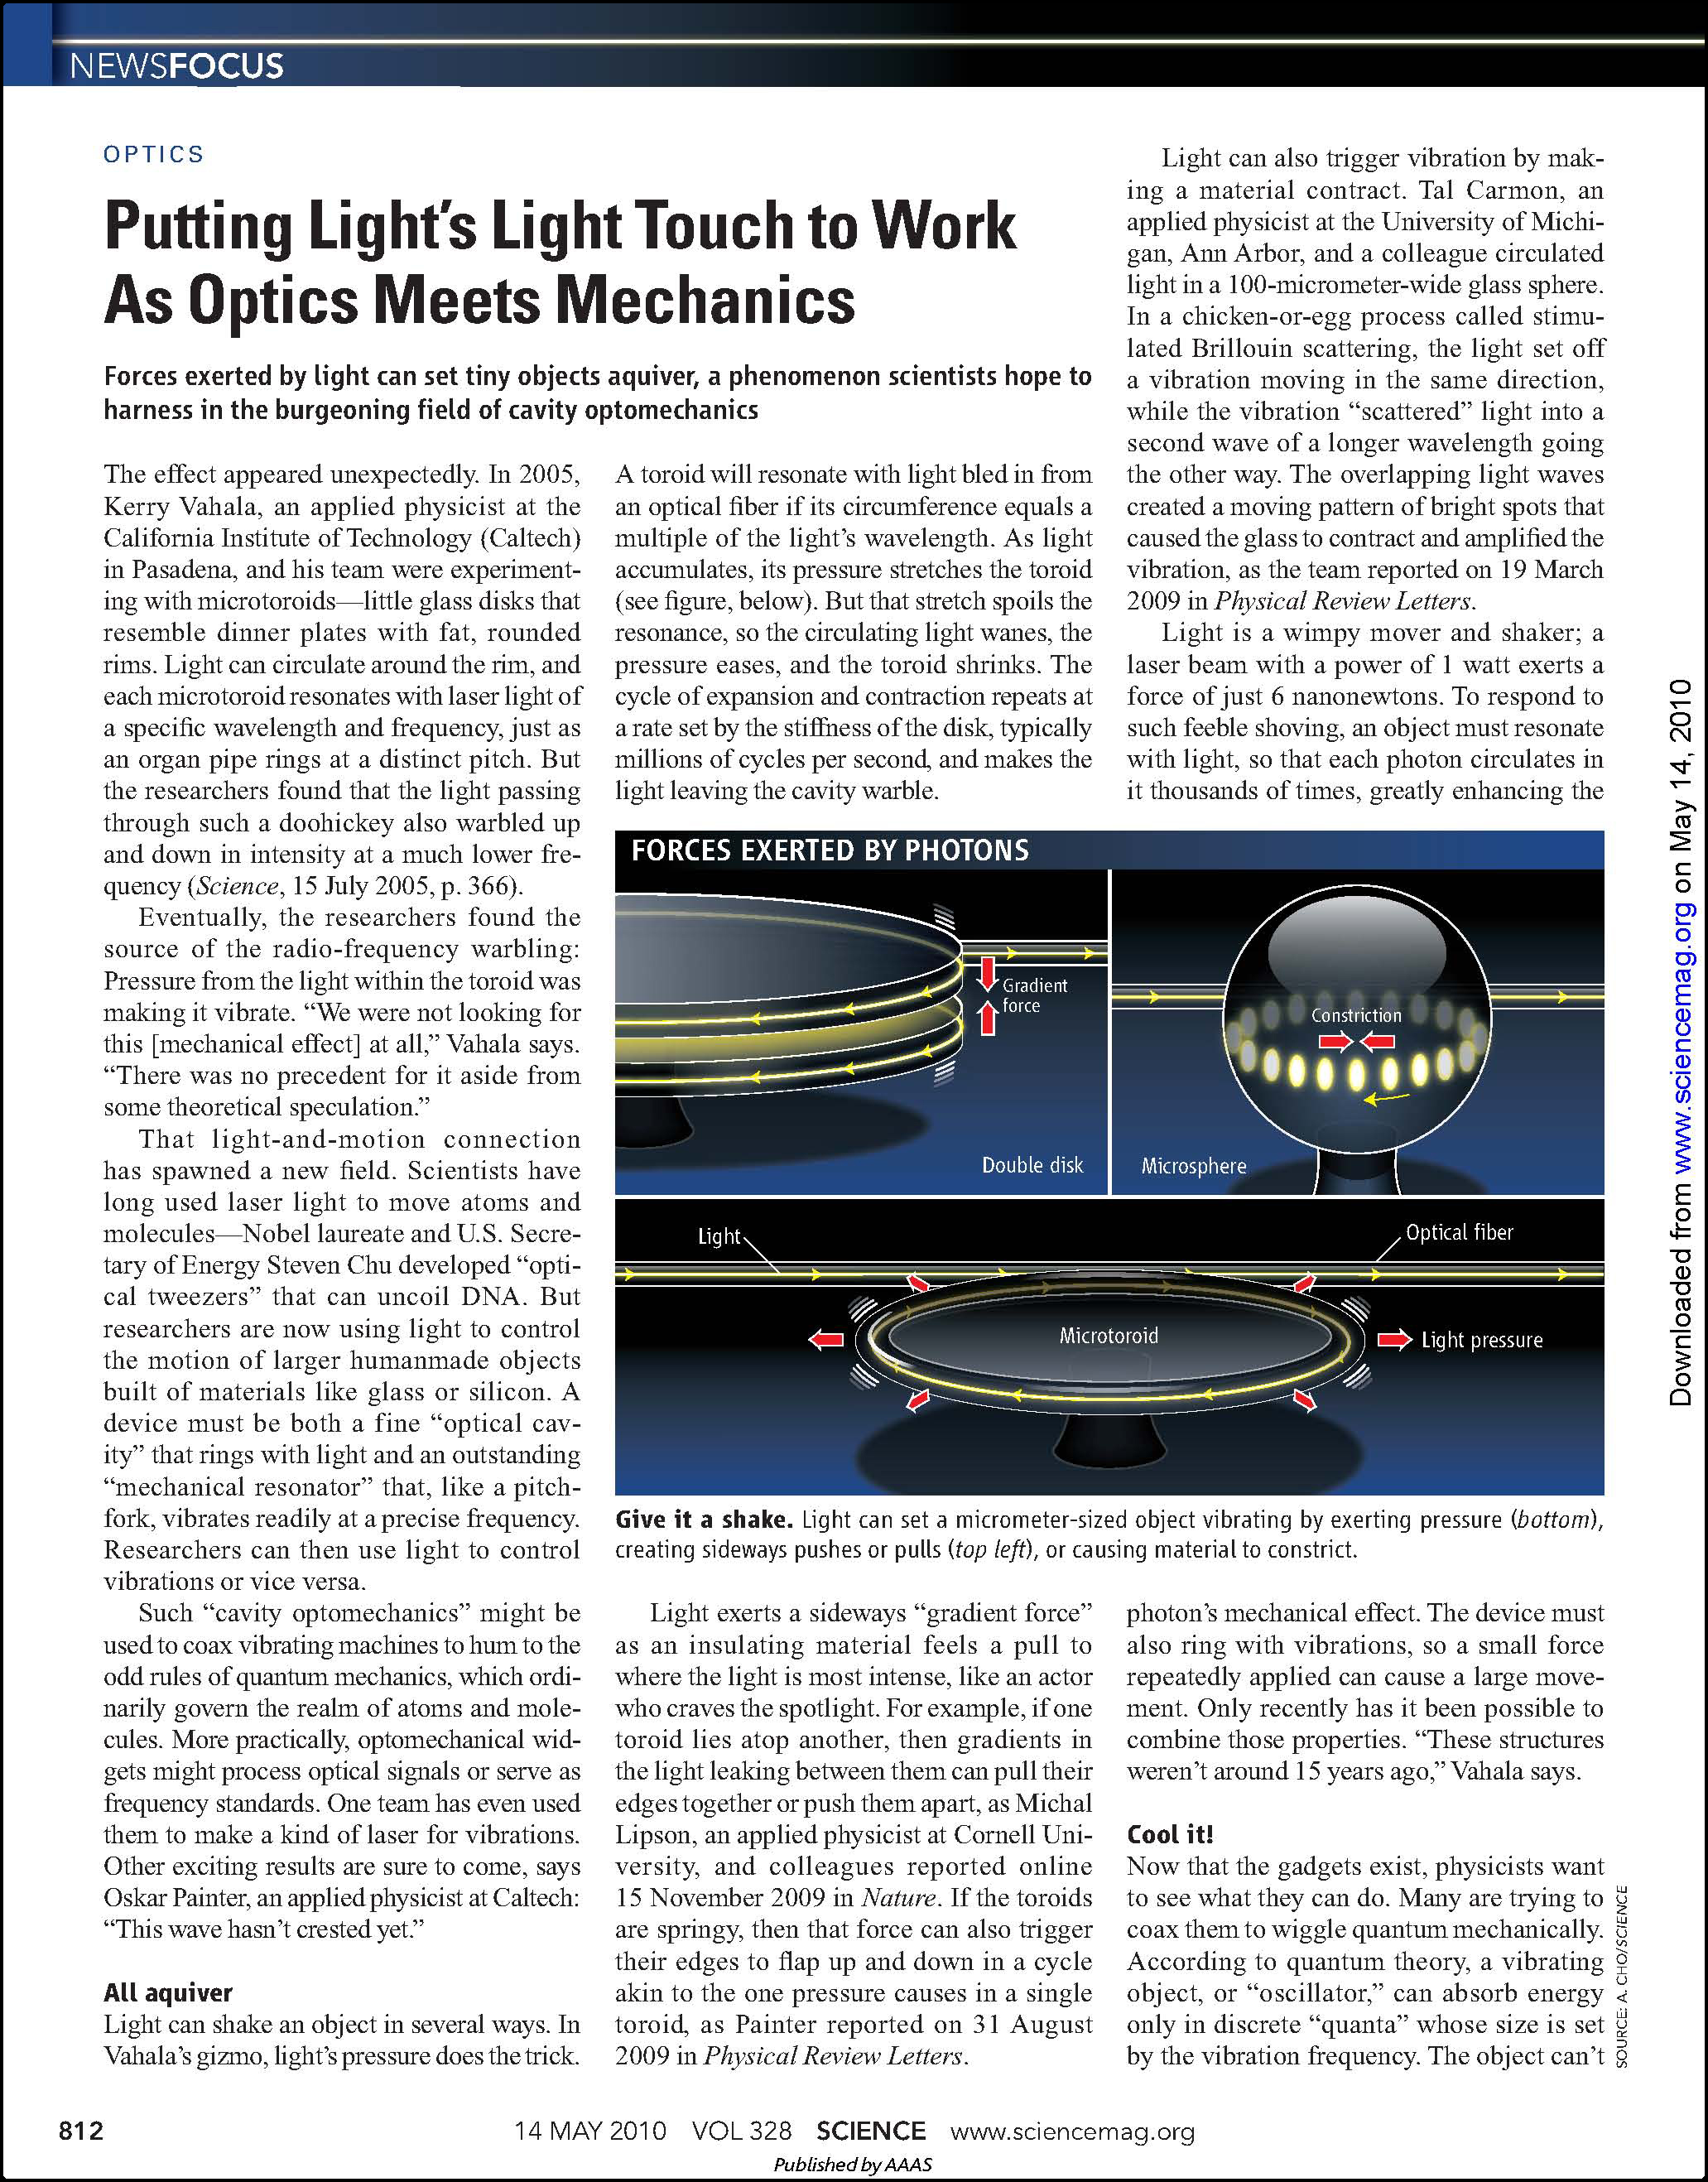 carmon-Cho - Review article of optomechanics - Science May 2010_Page_1